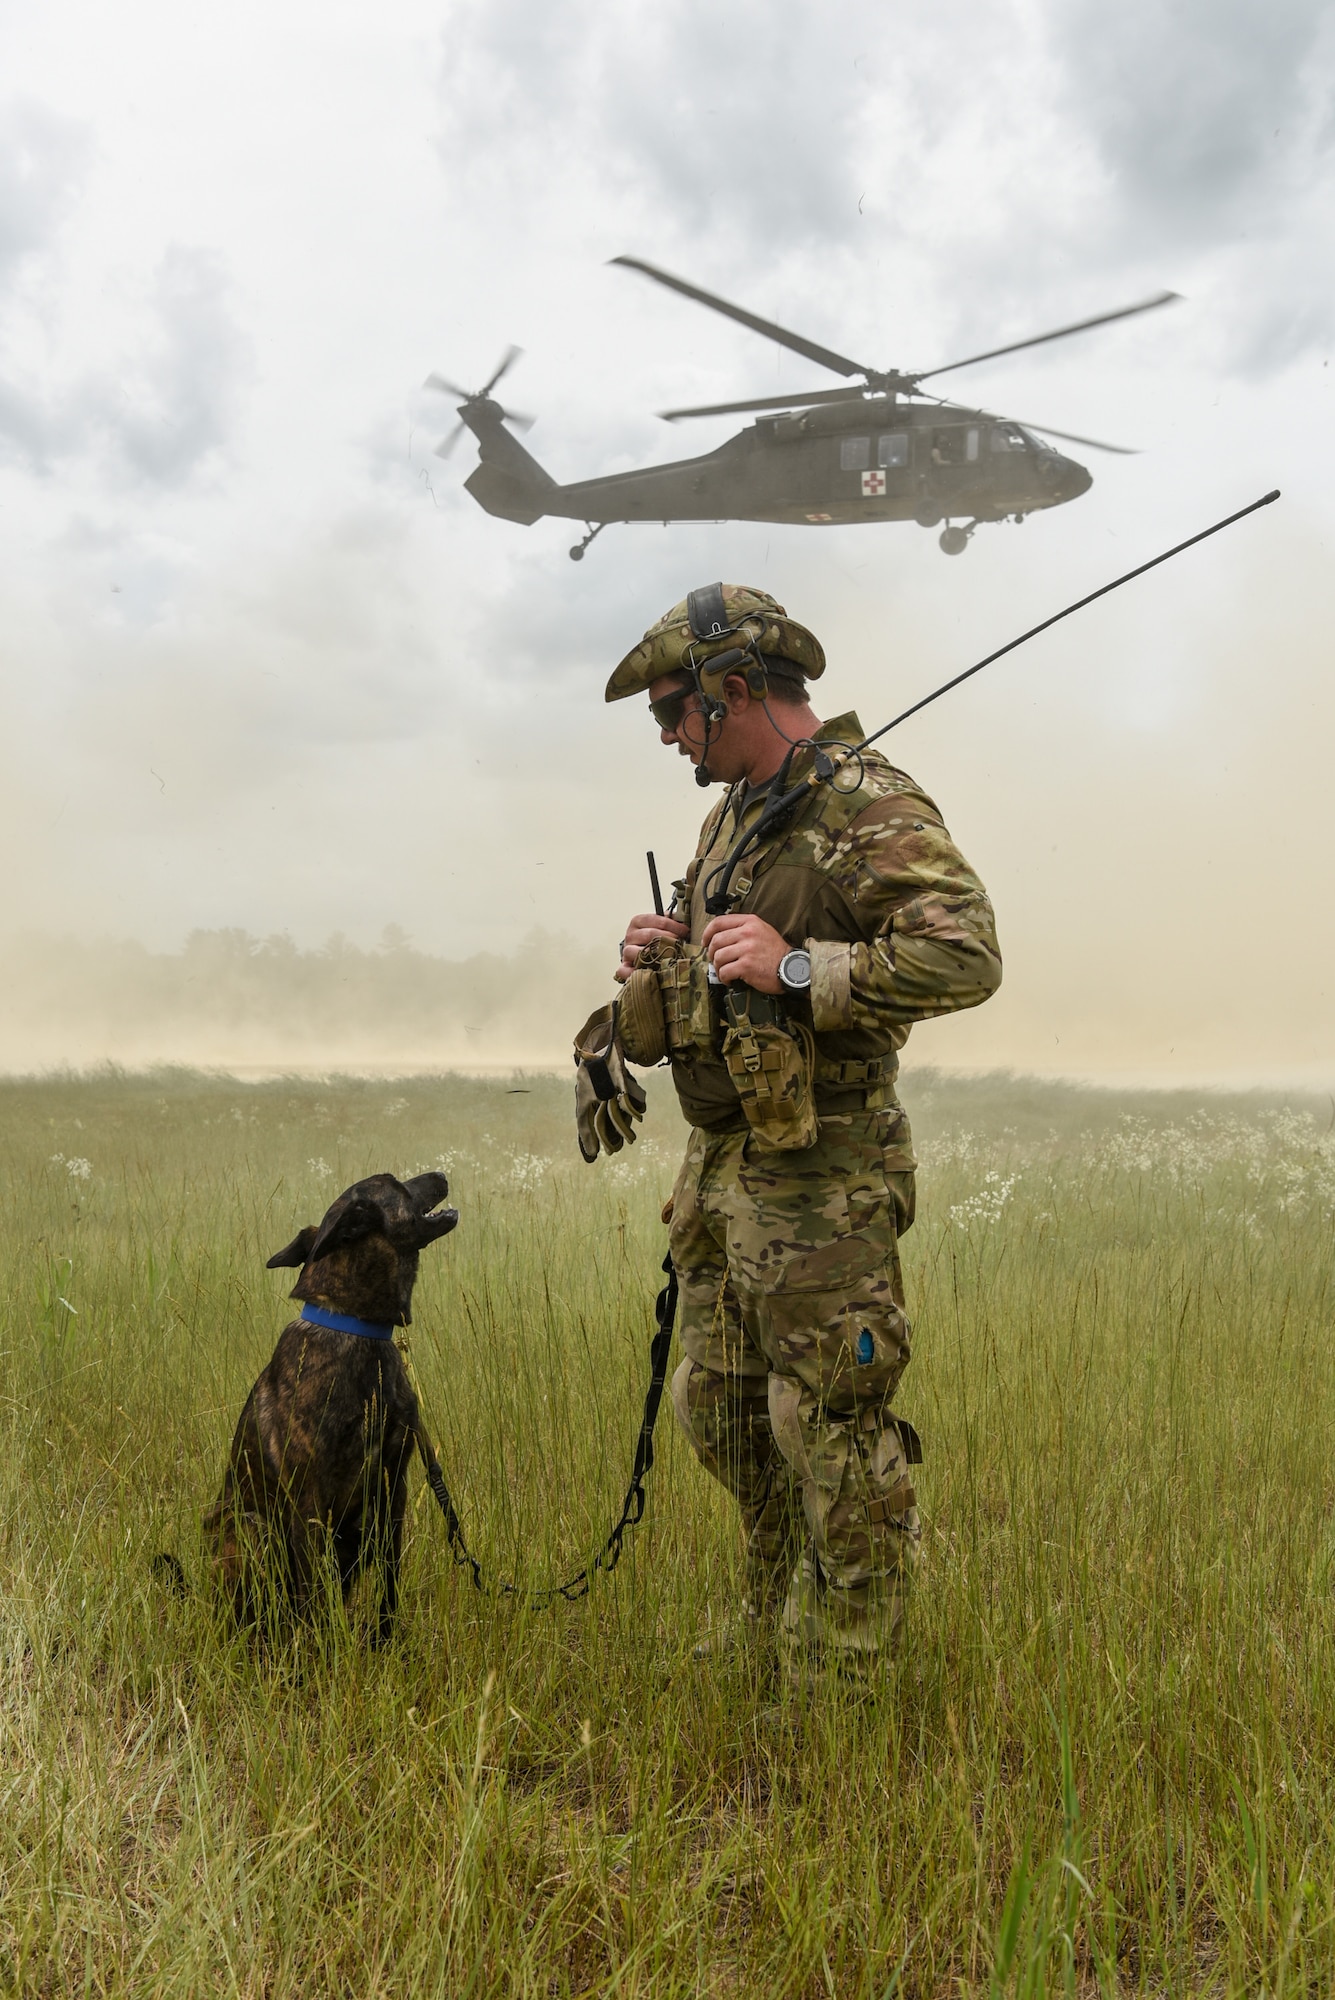 Master Sgt. Rudy Parsons, a pararescueman with the Kentucky Air National Guard’s 123rd Special Tactics Squadron, and Callie, his search and rescue dog, participate in Patriot North, an annual domestic operations exercise designed to provide natural disaster-response training at Volk Field, Wis., July 17, 2019. Callie is currently the only search and rescue dog in the Department of Defense. (U.S. Air National Guard photo by Staff Sgt. Joshua Horton)